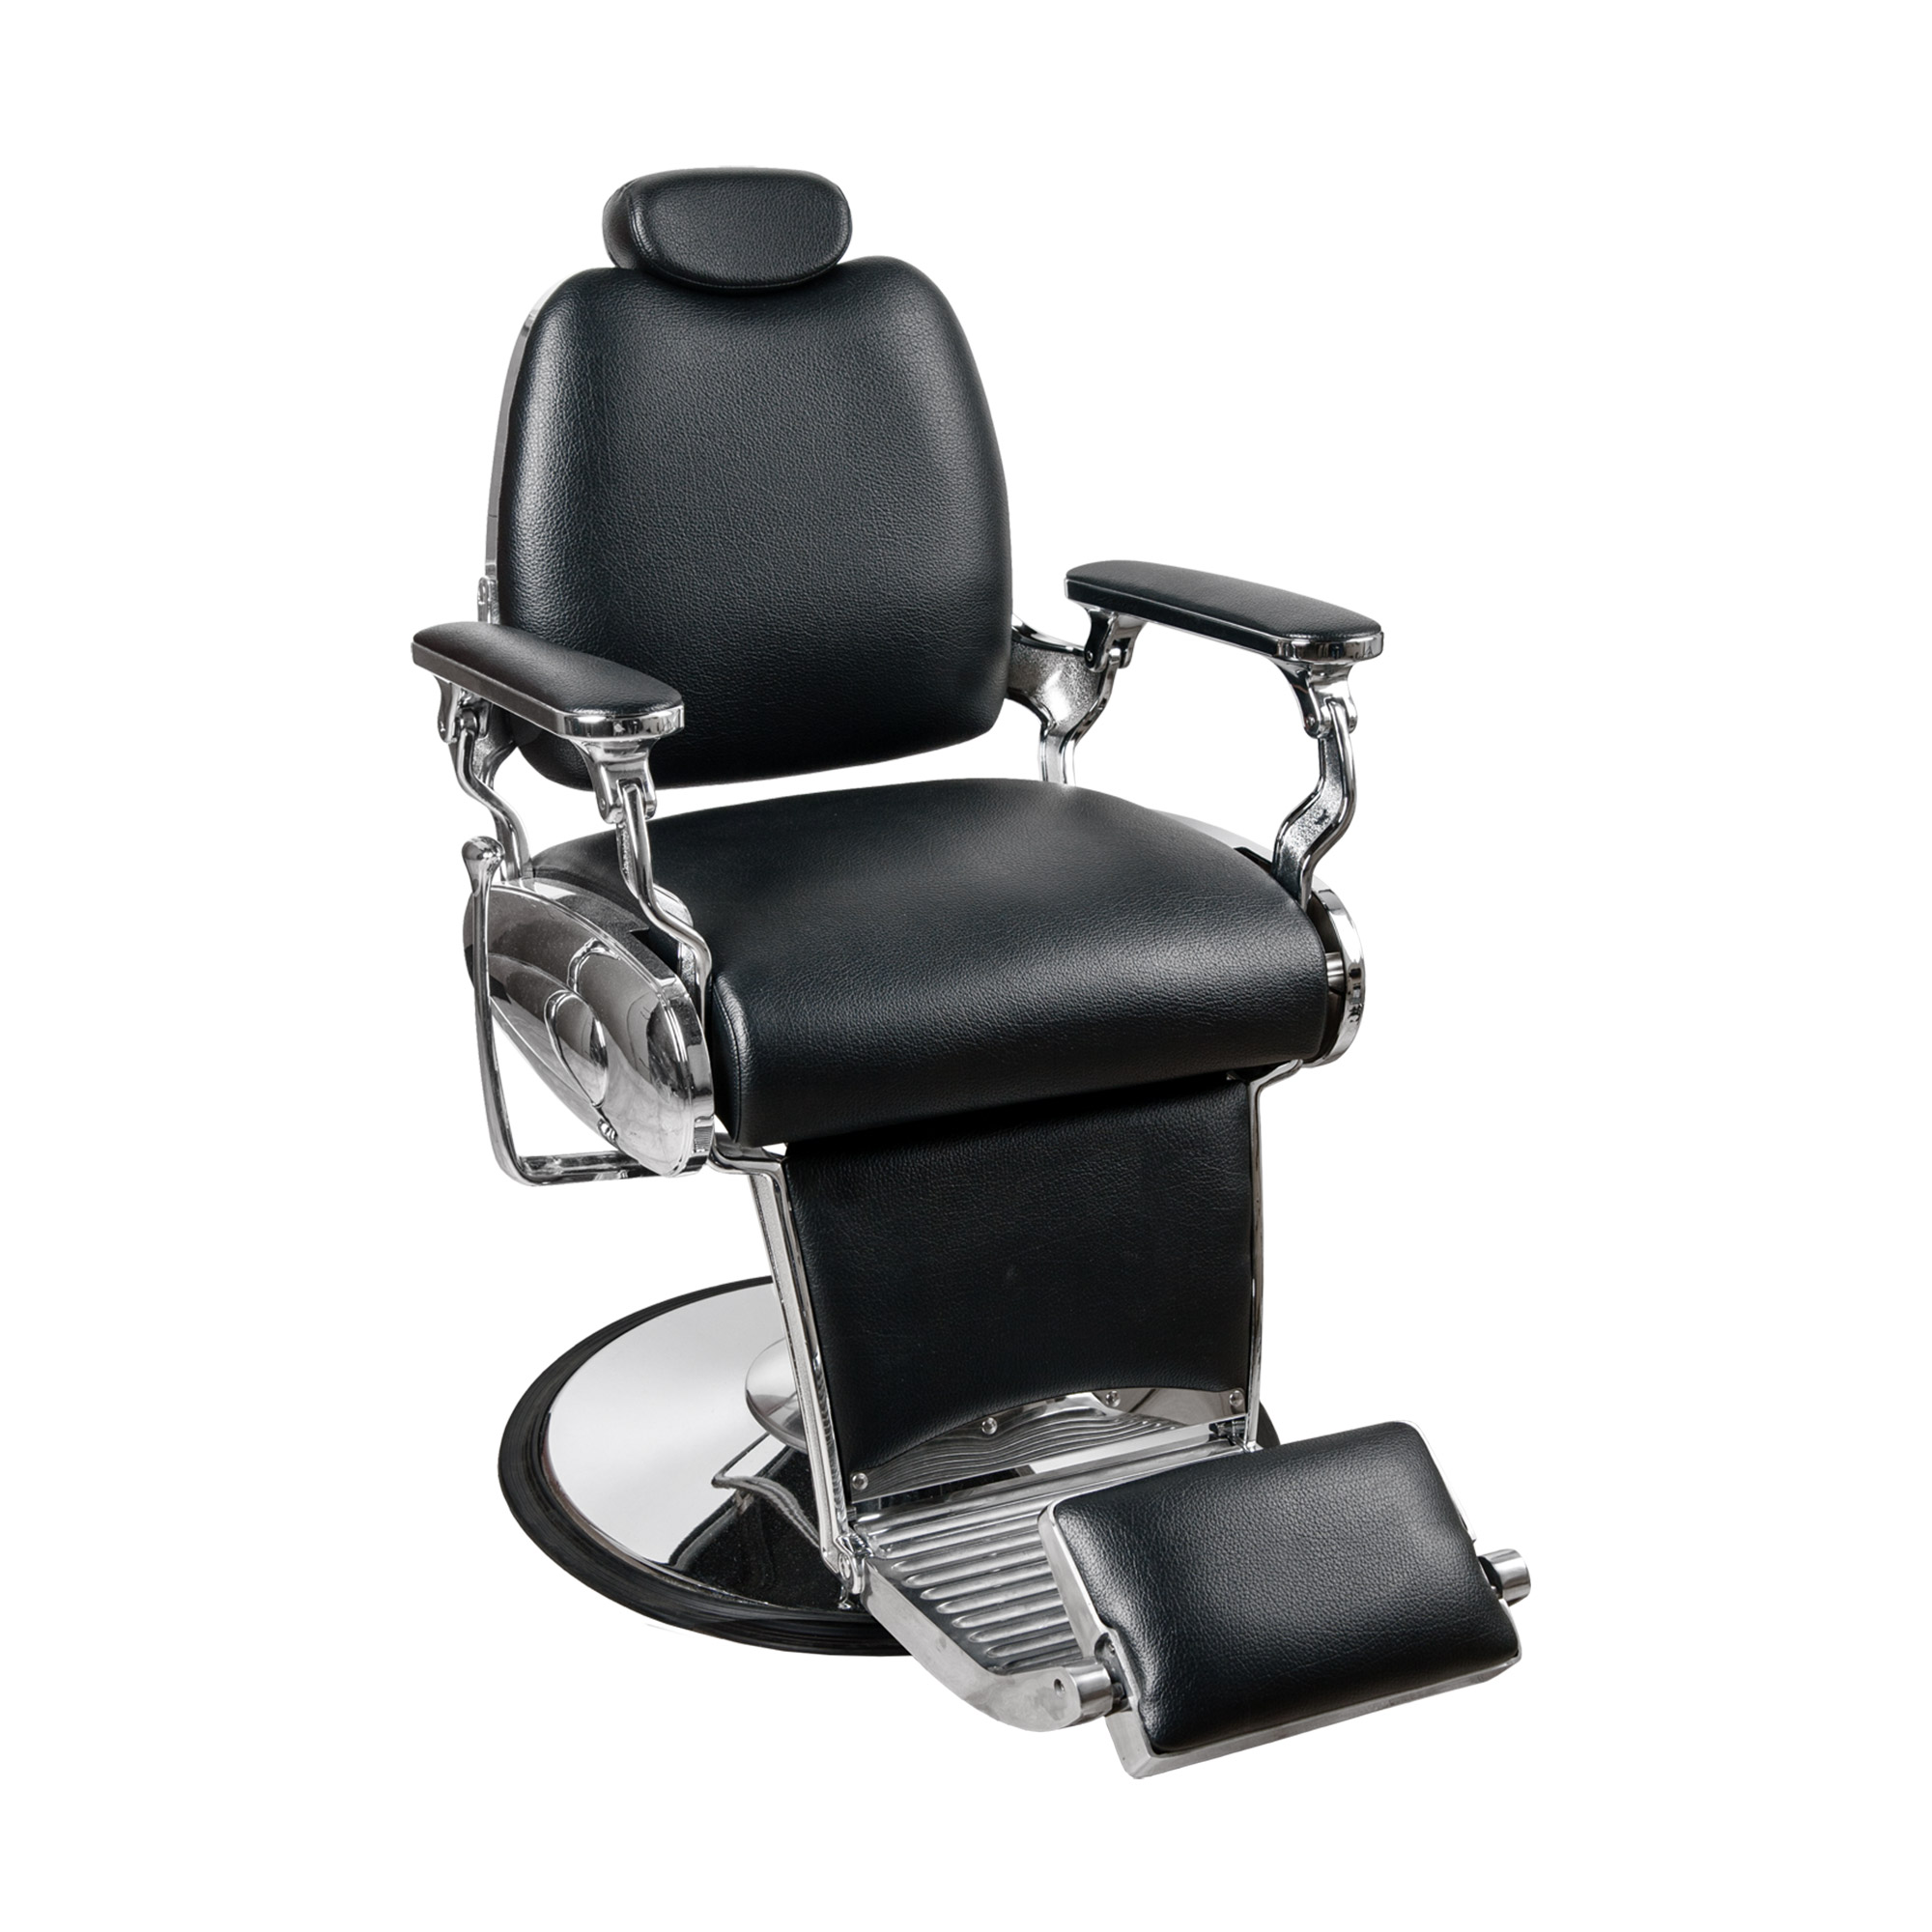 The Ultimate Guide to Choosing the Perfect Barber Chair